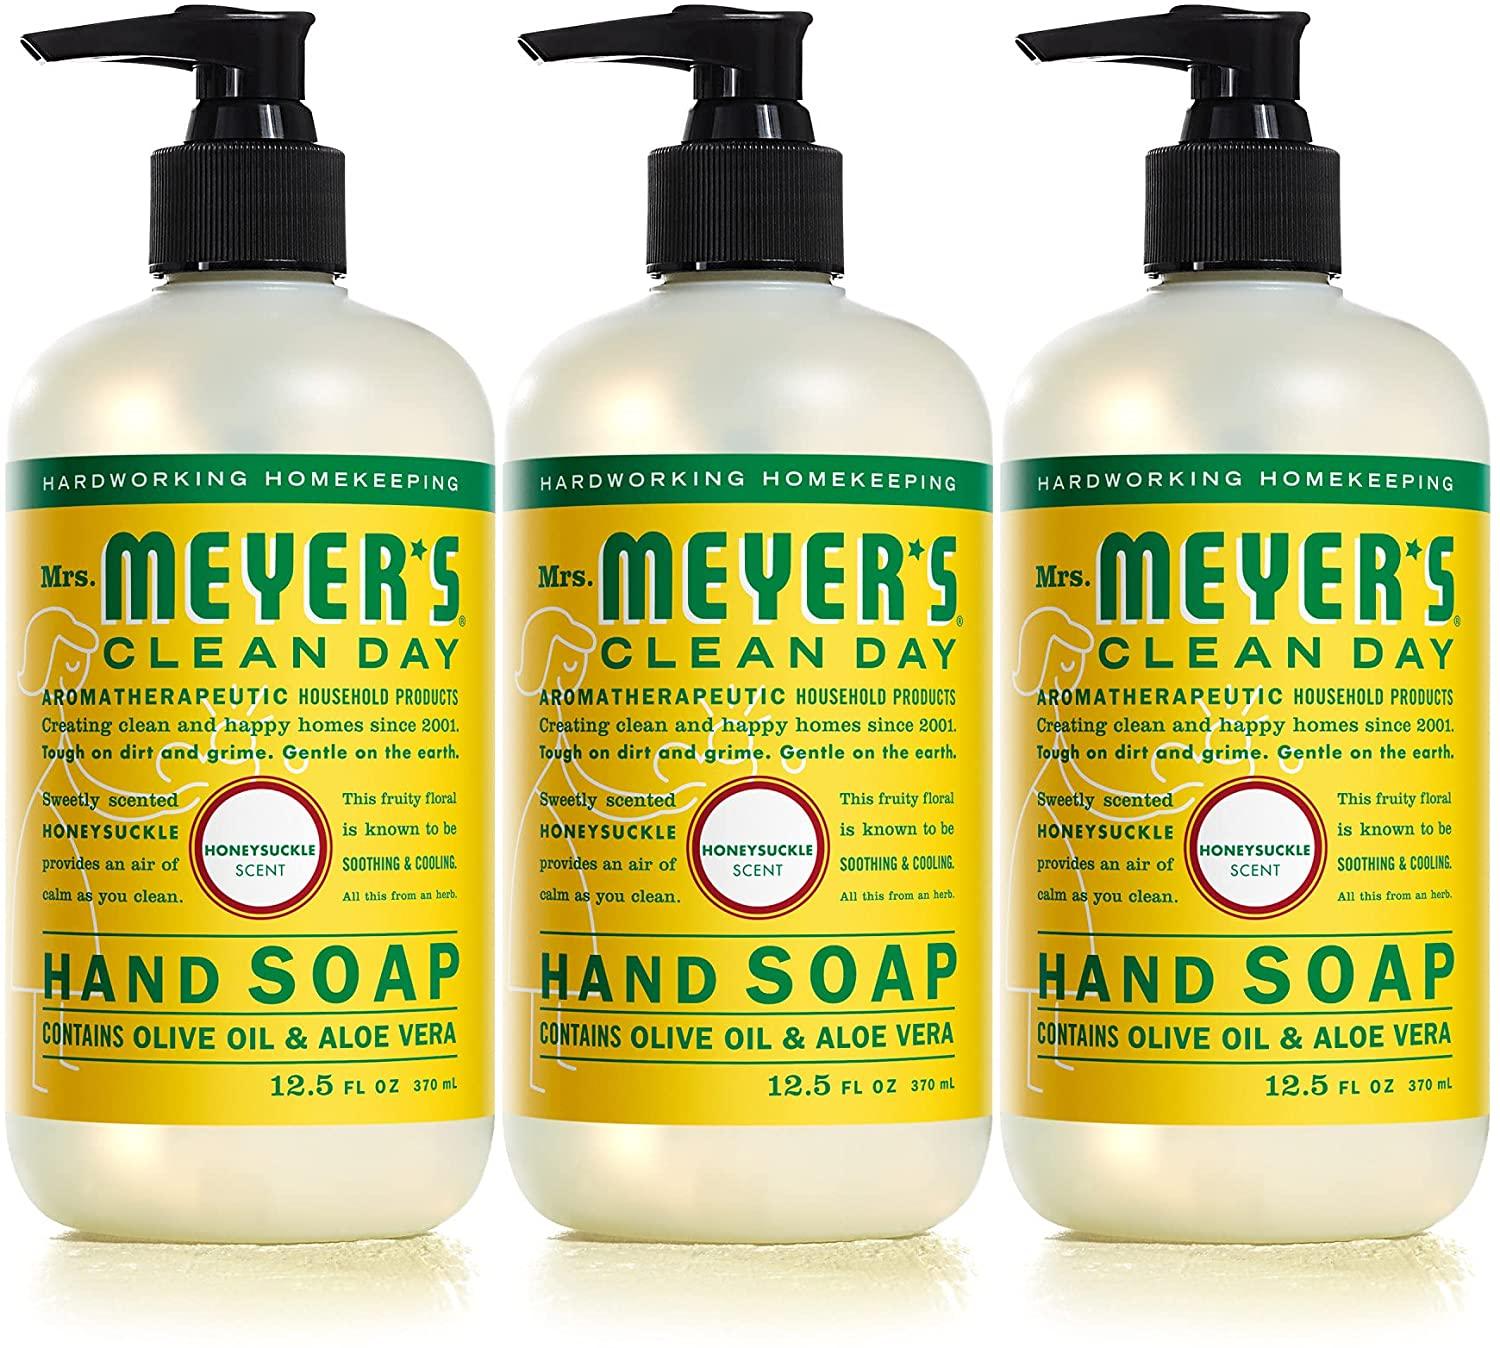 3x Mrs Meyers Clean Day Honeysuckle Hand Soap for $7.36 Shipped